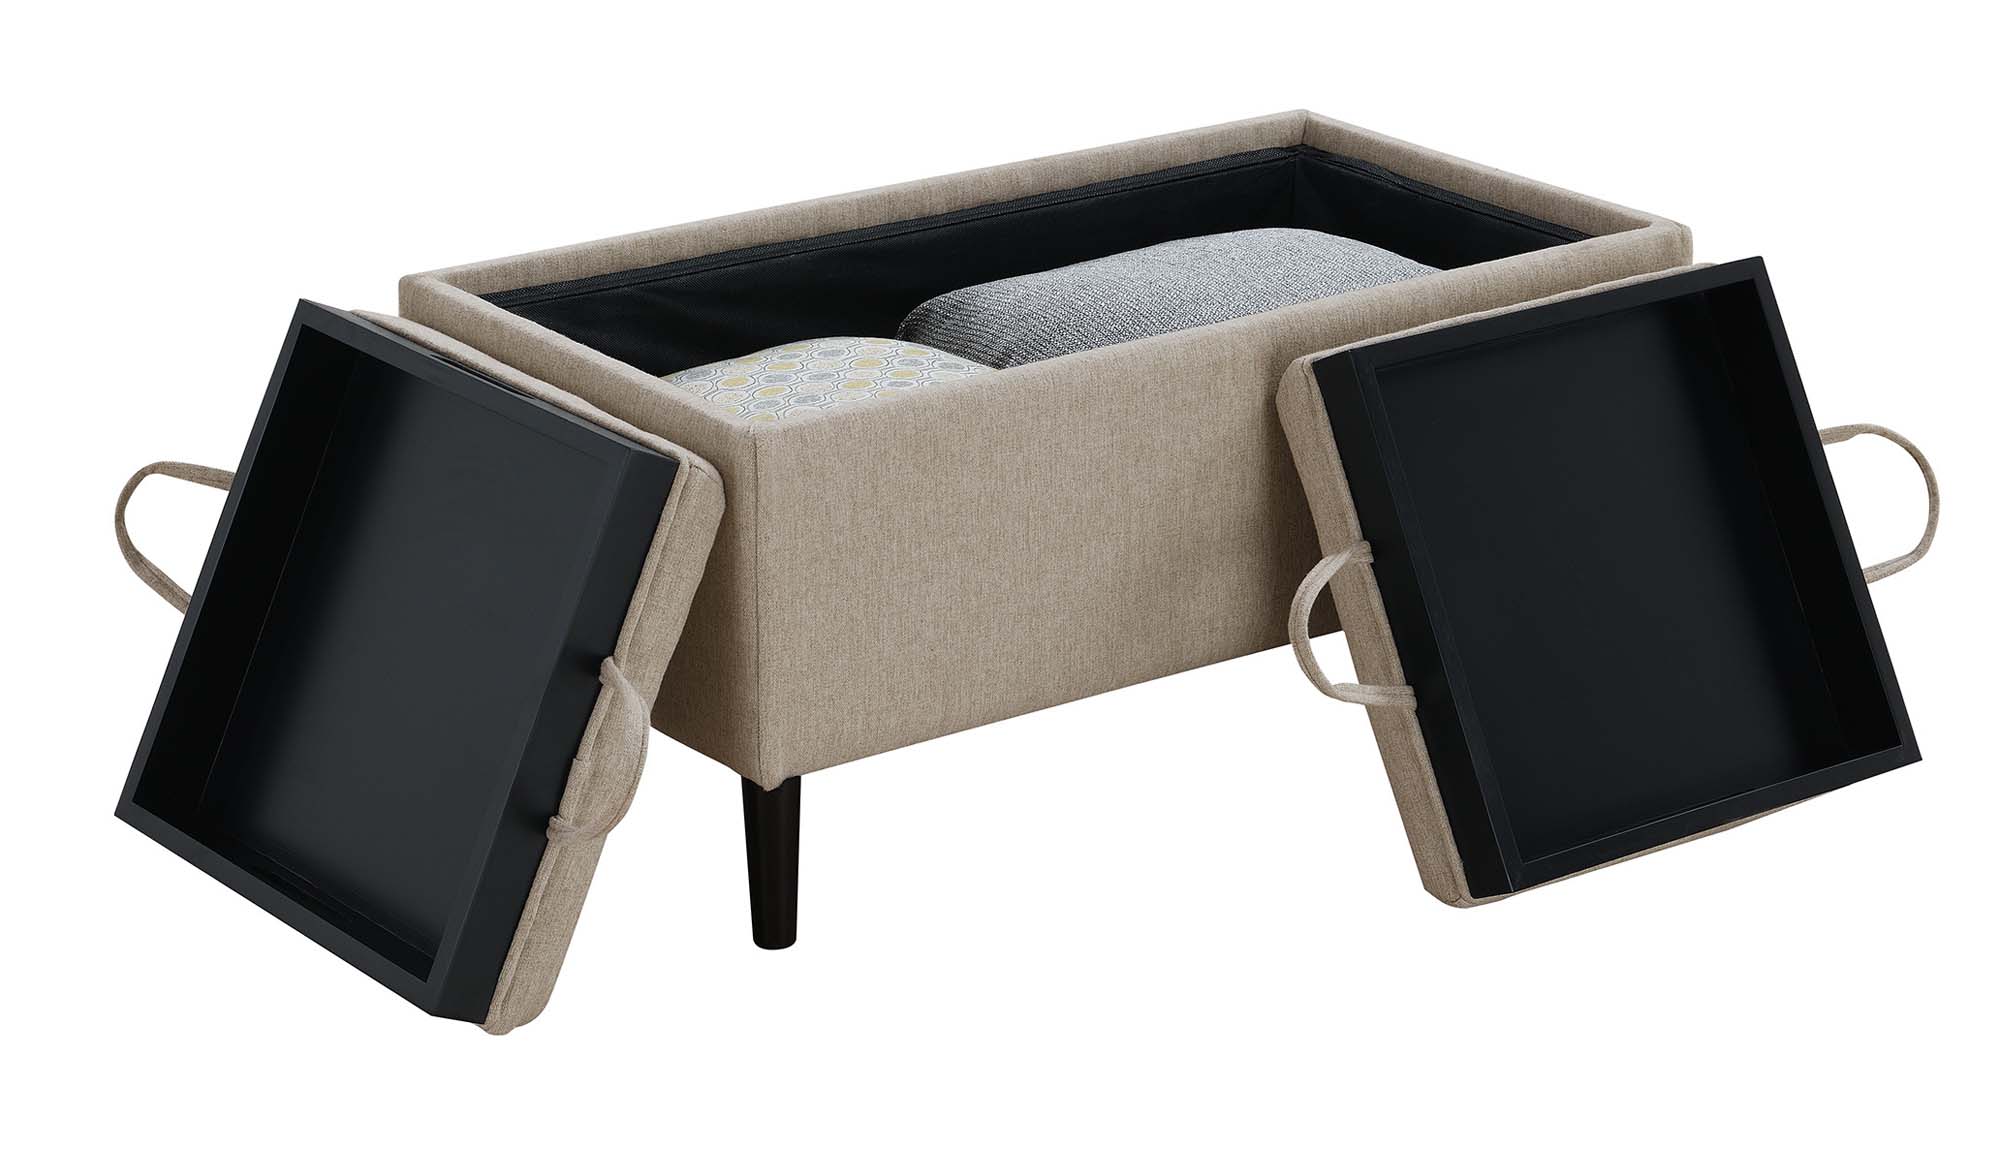 Convenience Concepts Designs4Comfort Magnolia Storage Ottoman with Trays - image 3 of 4